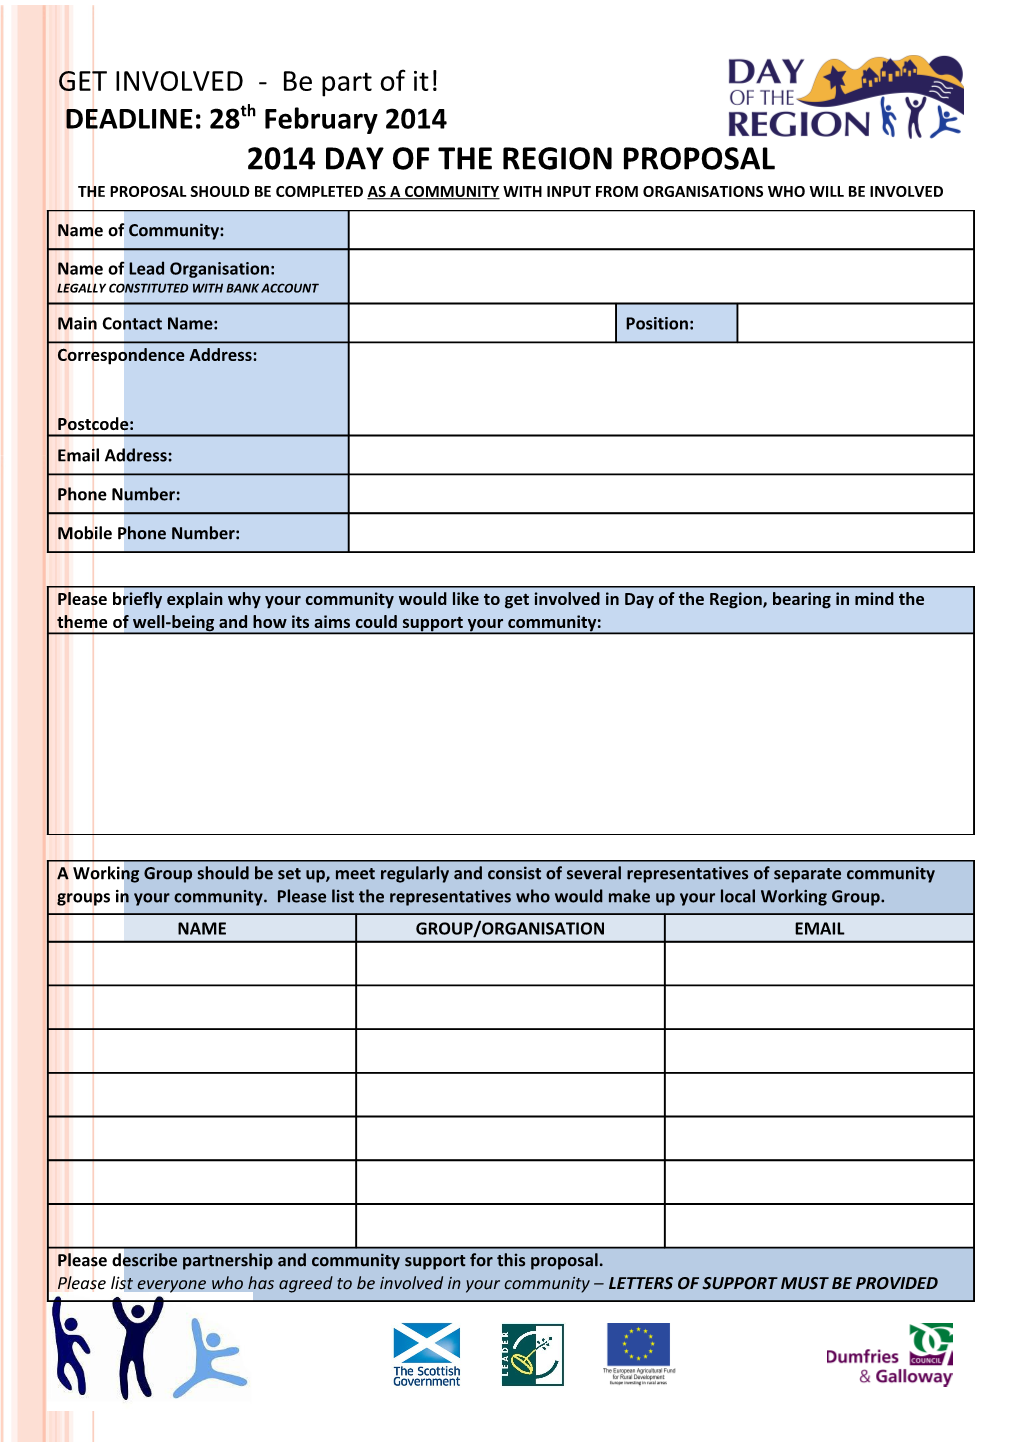 Leader Grant Claim Form and Progress Report